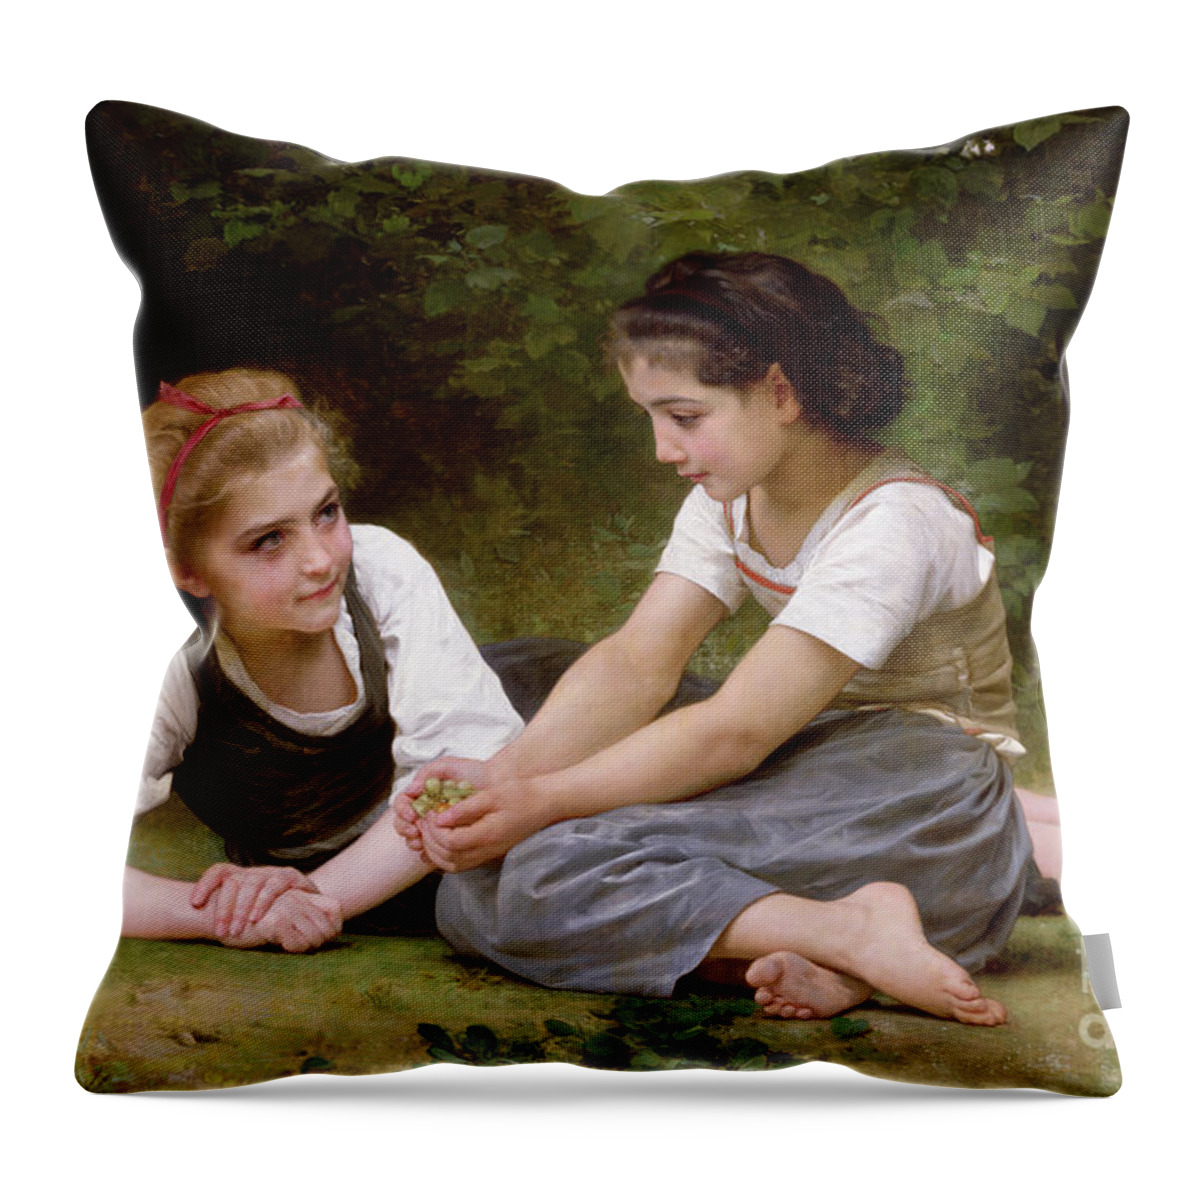 Nut Throw Pillow featuring the painting The Nut Gatherers by William-Adolphe Bouguereau